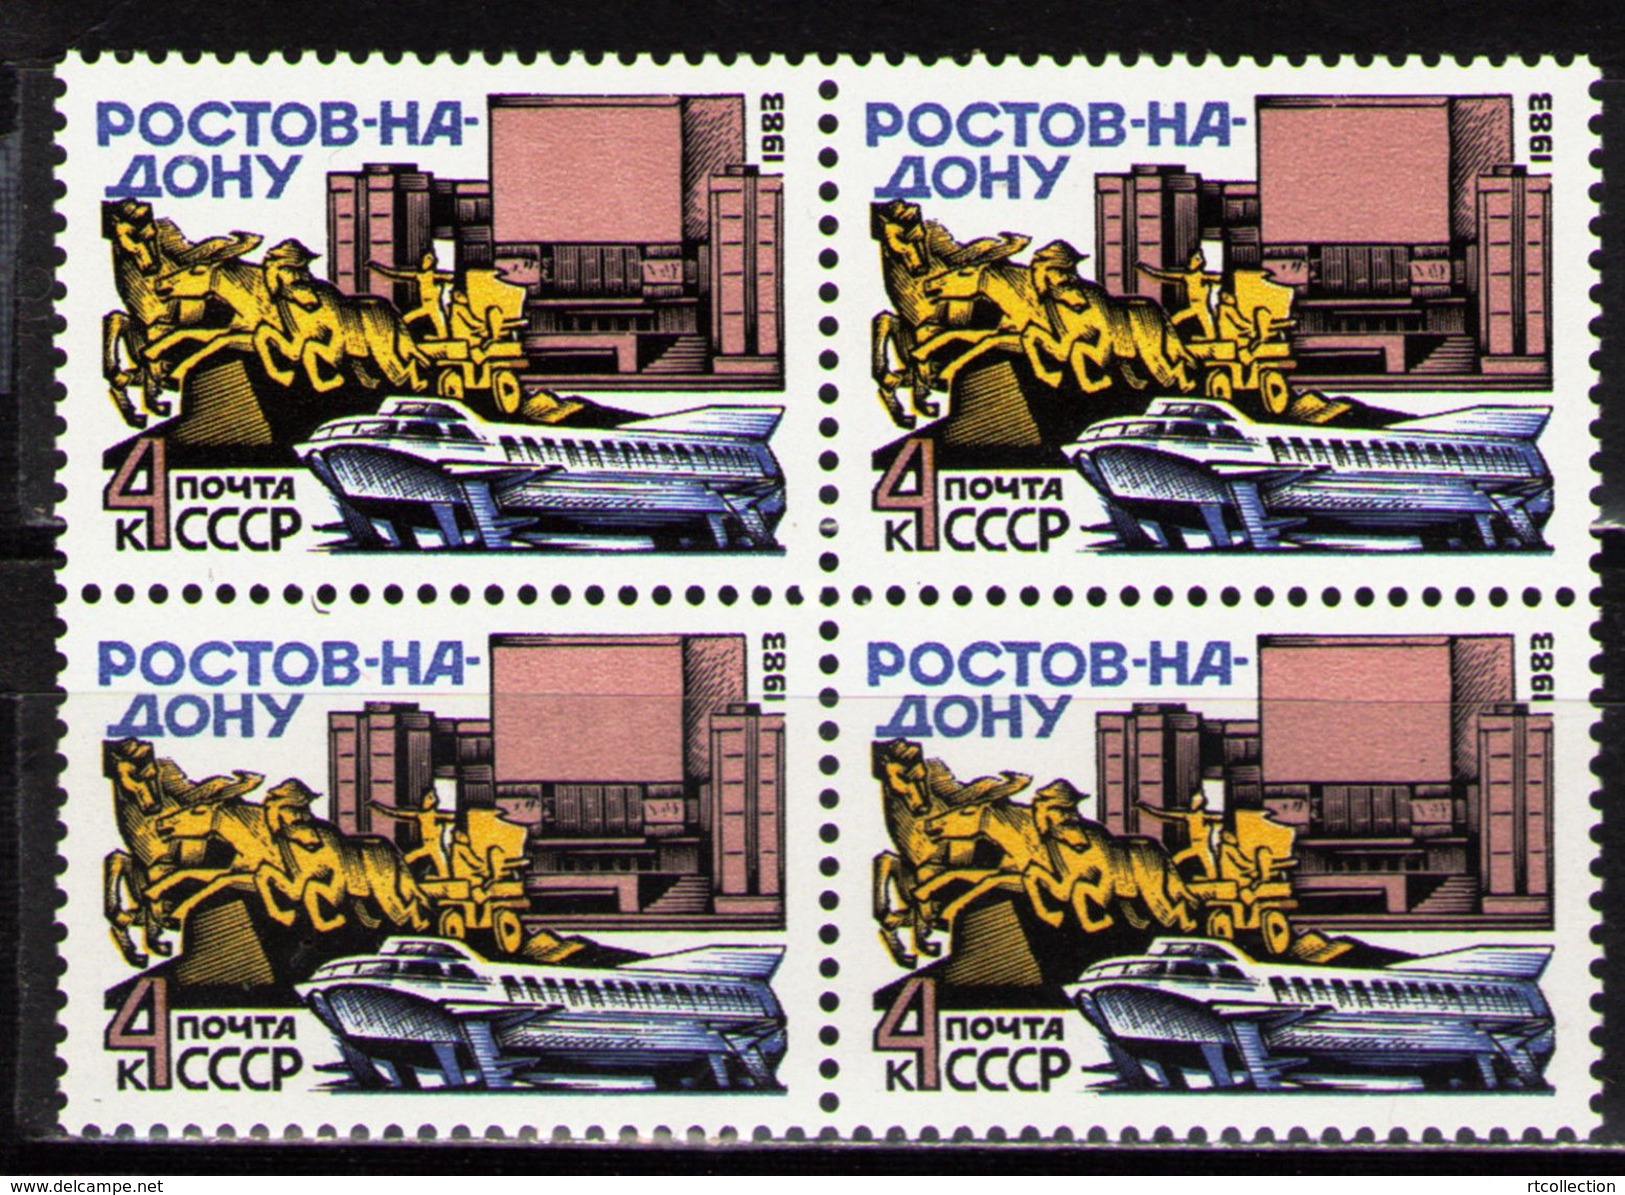 USSR Russia 1983 Block Rostov-on-Don Architecture Theatre Art Memorial Horses Monuments Stamps MNH Michel 5270 Sc 5140 - Monuments